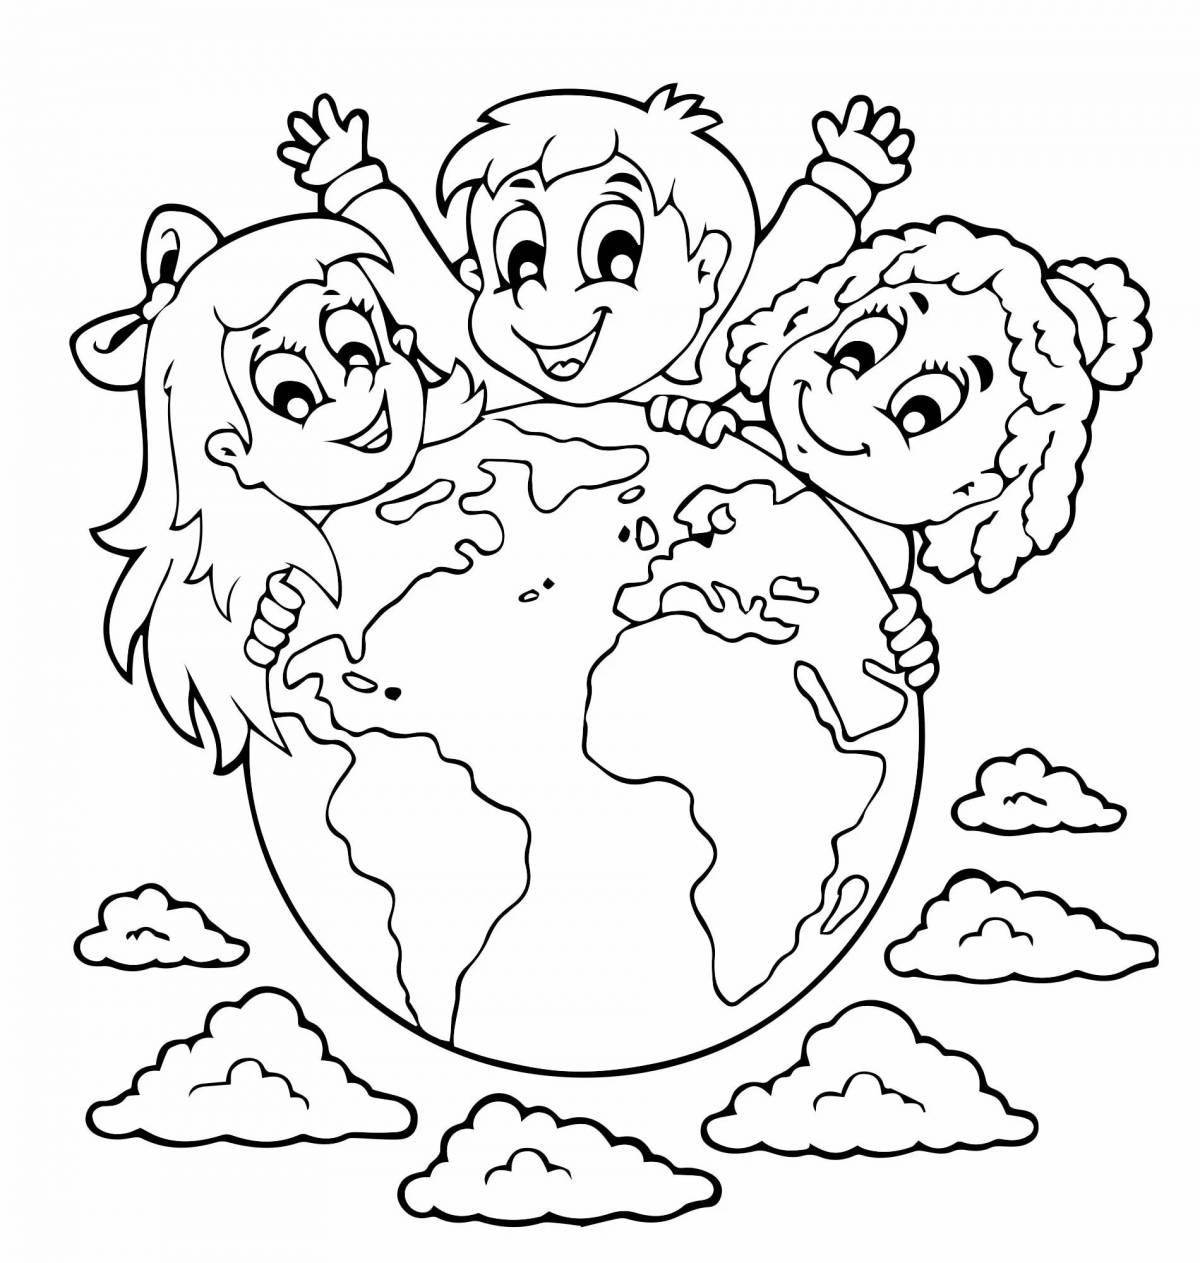 Cute coloring world without war for kids